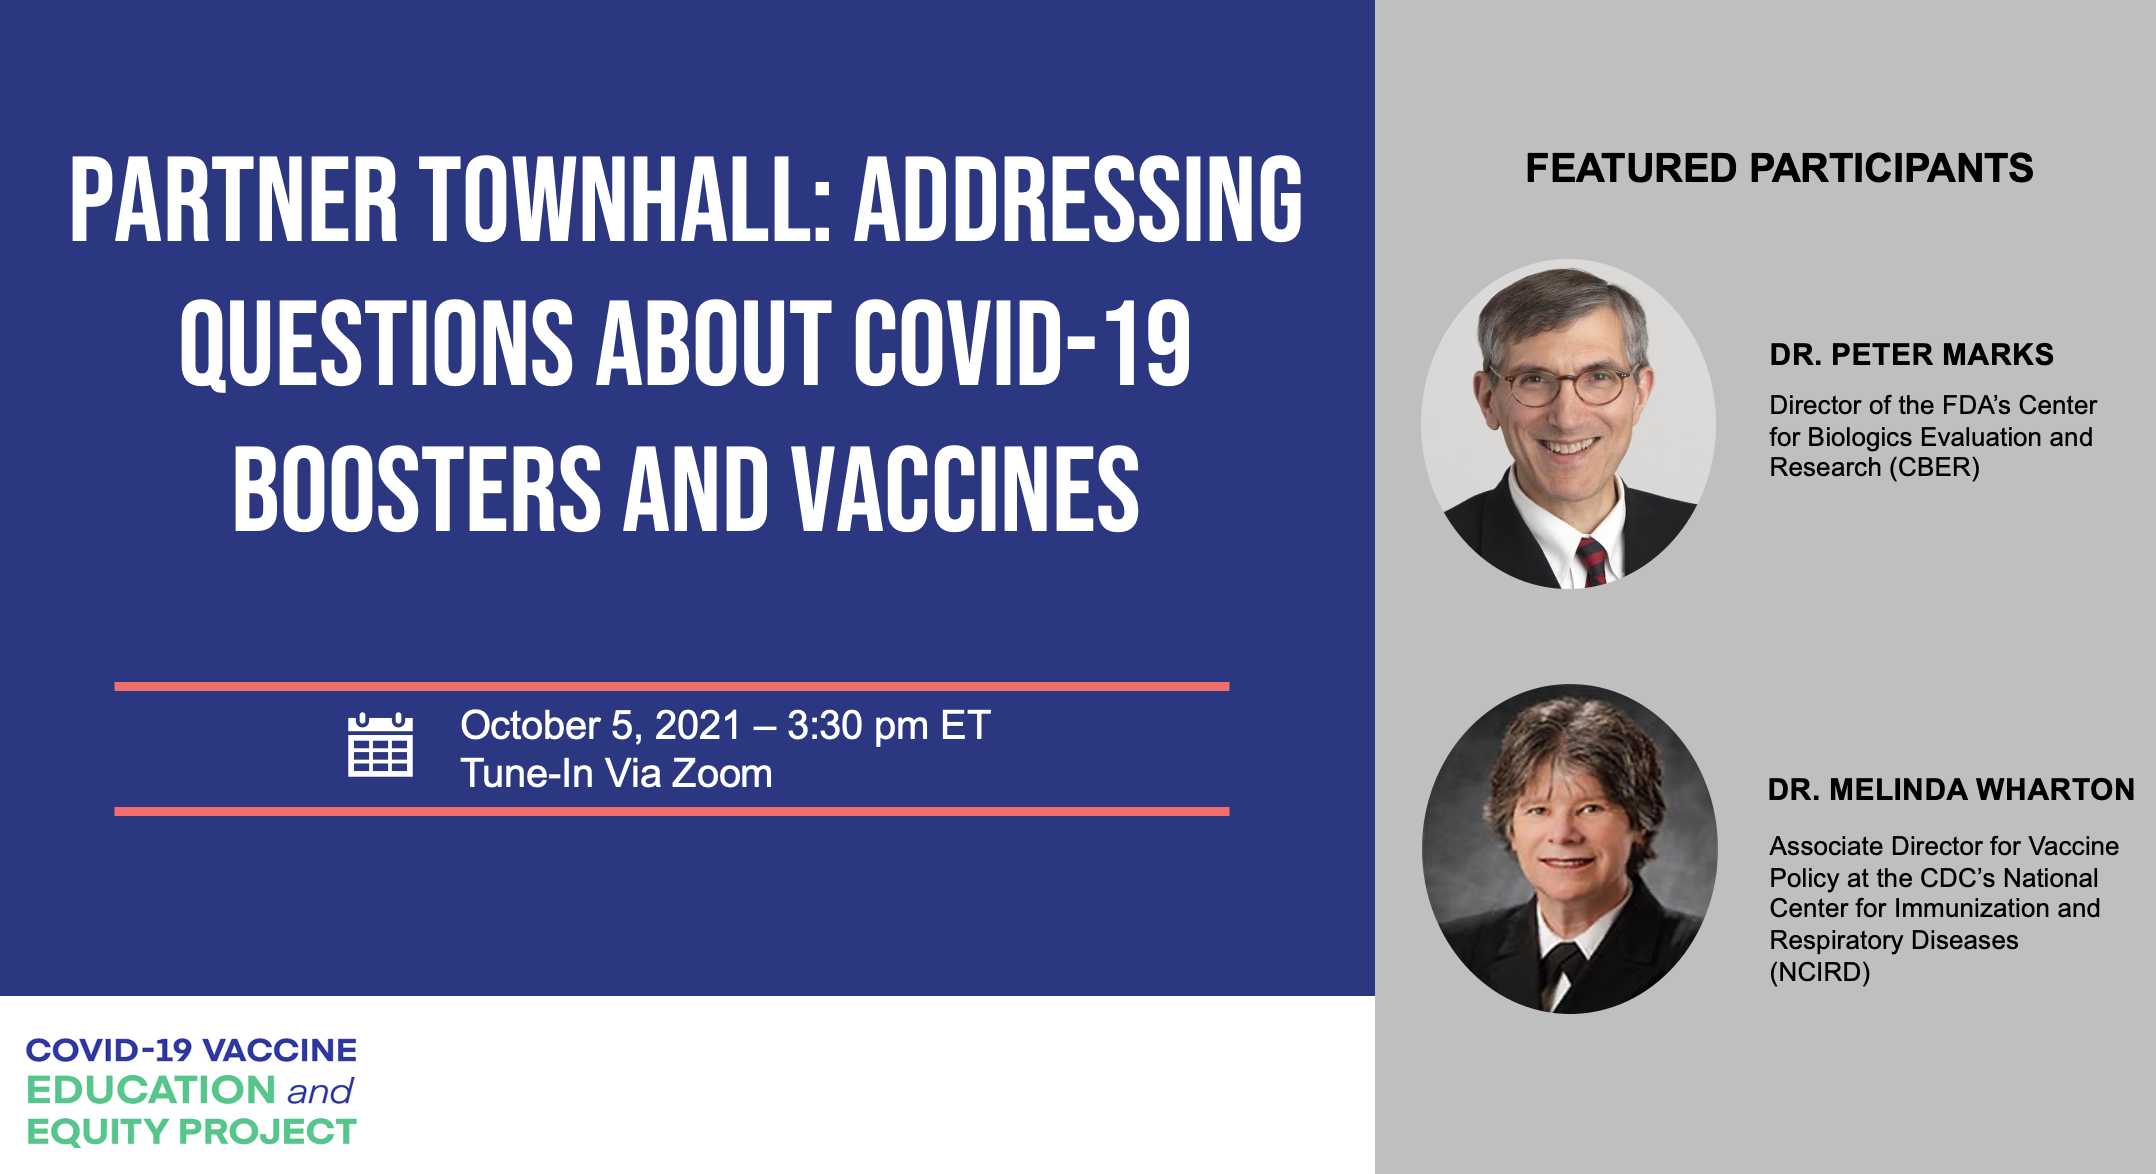 Partner Townhall: Addressing Questions about COVID-19 Boosters and Vaccines